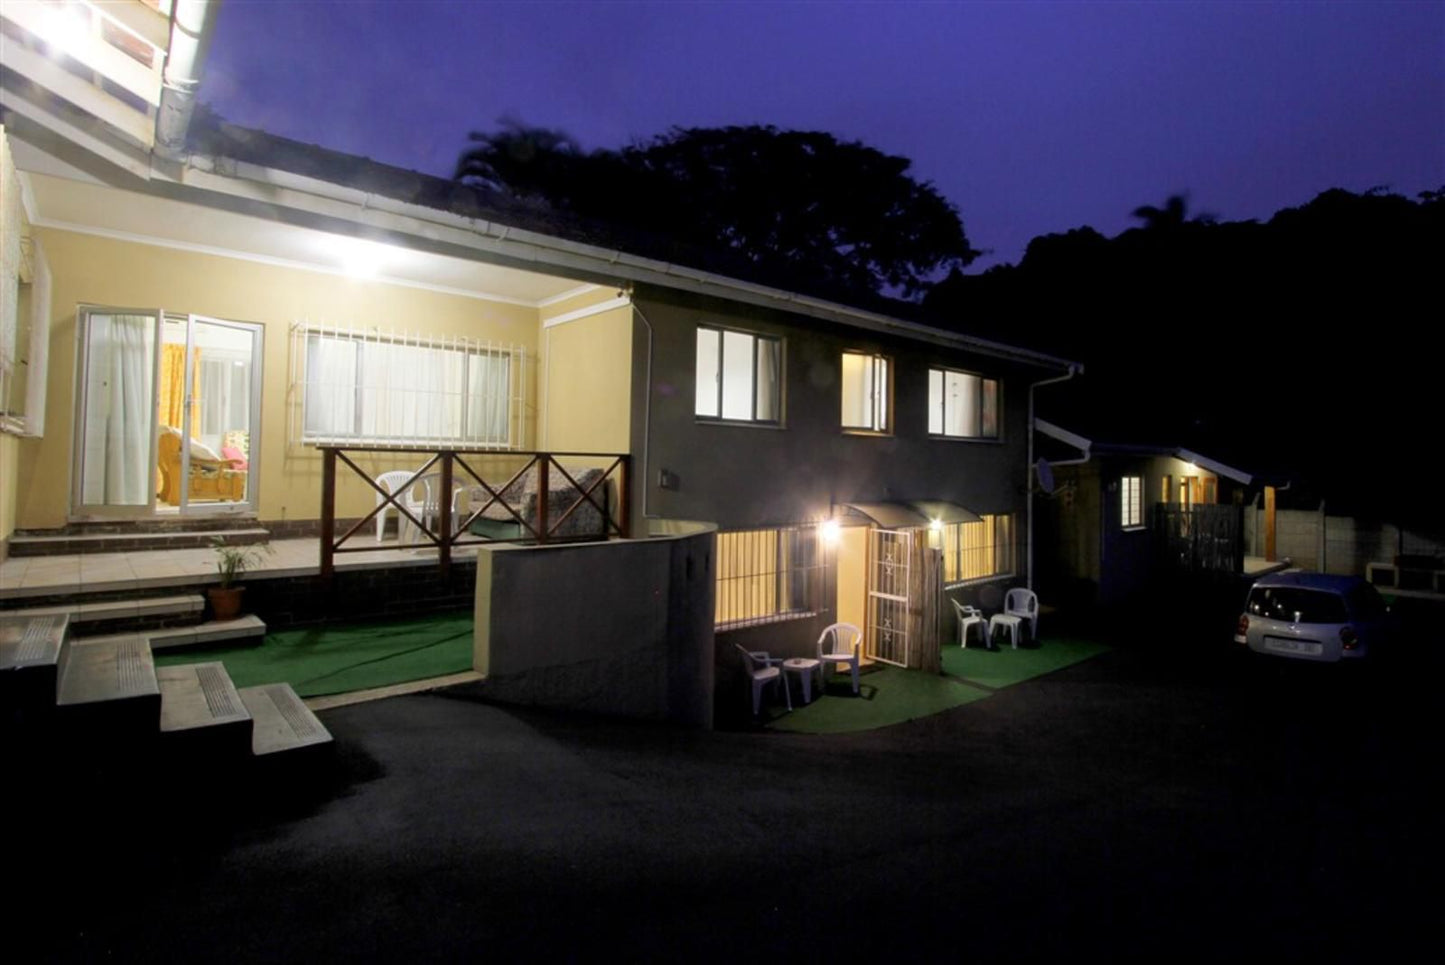 Clinch Self Catering Durban North Durban Kwazulu Natal South Africa House, Building, Architecture